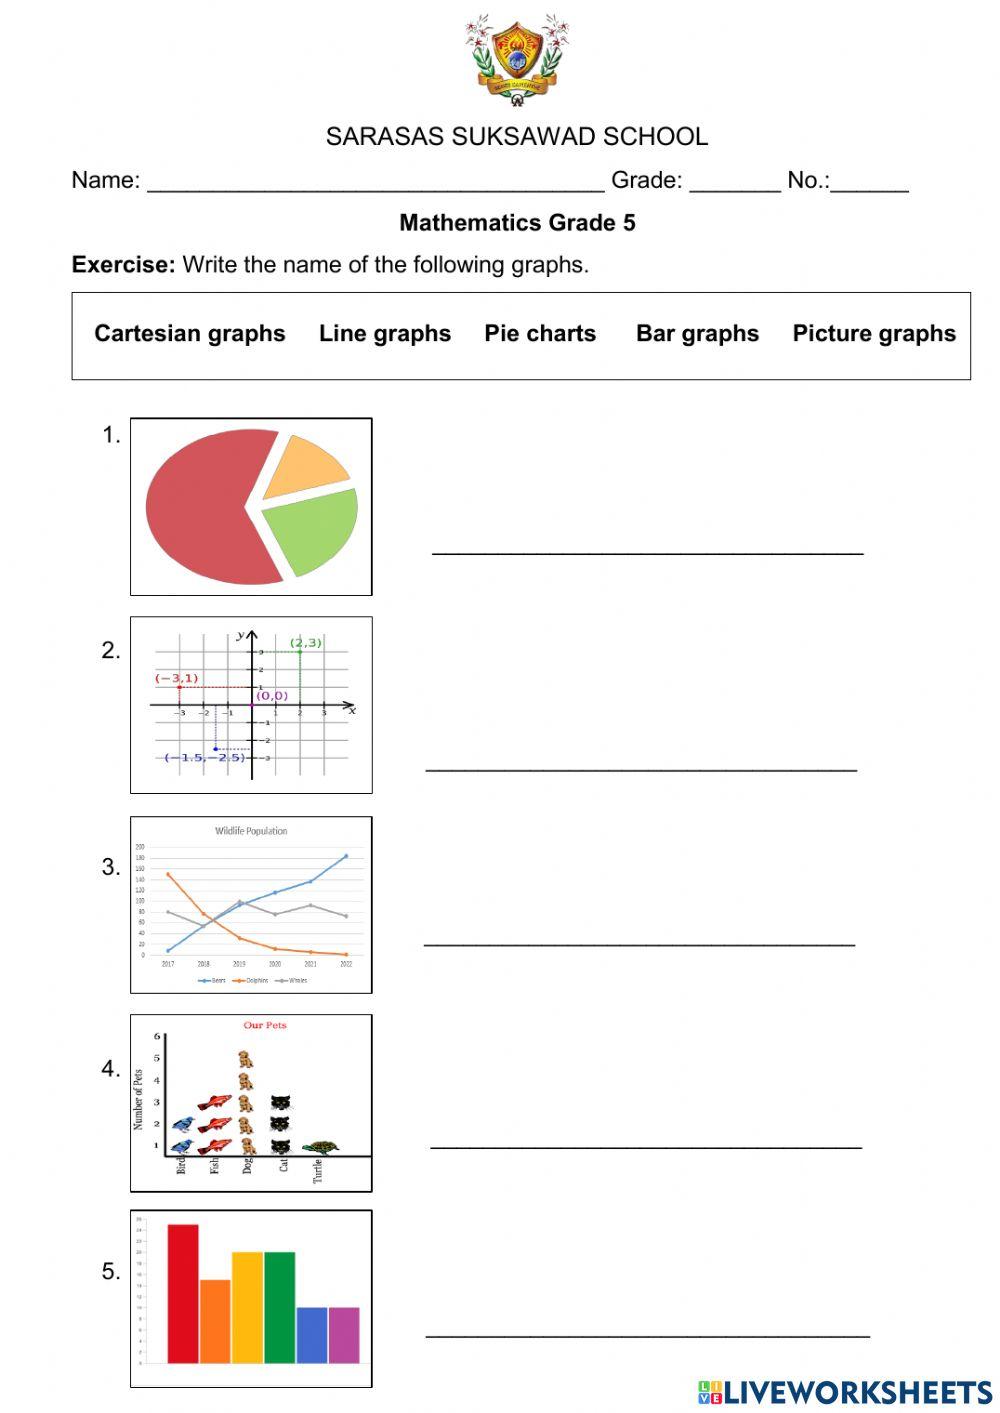 Write name of the following graphs